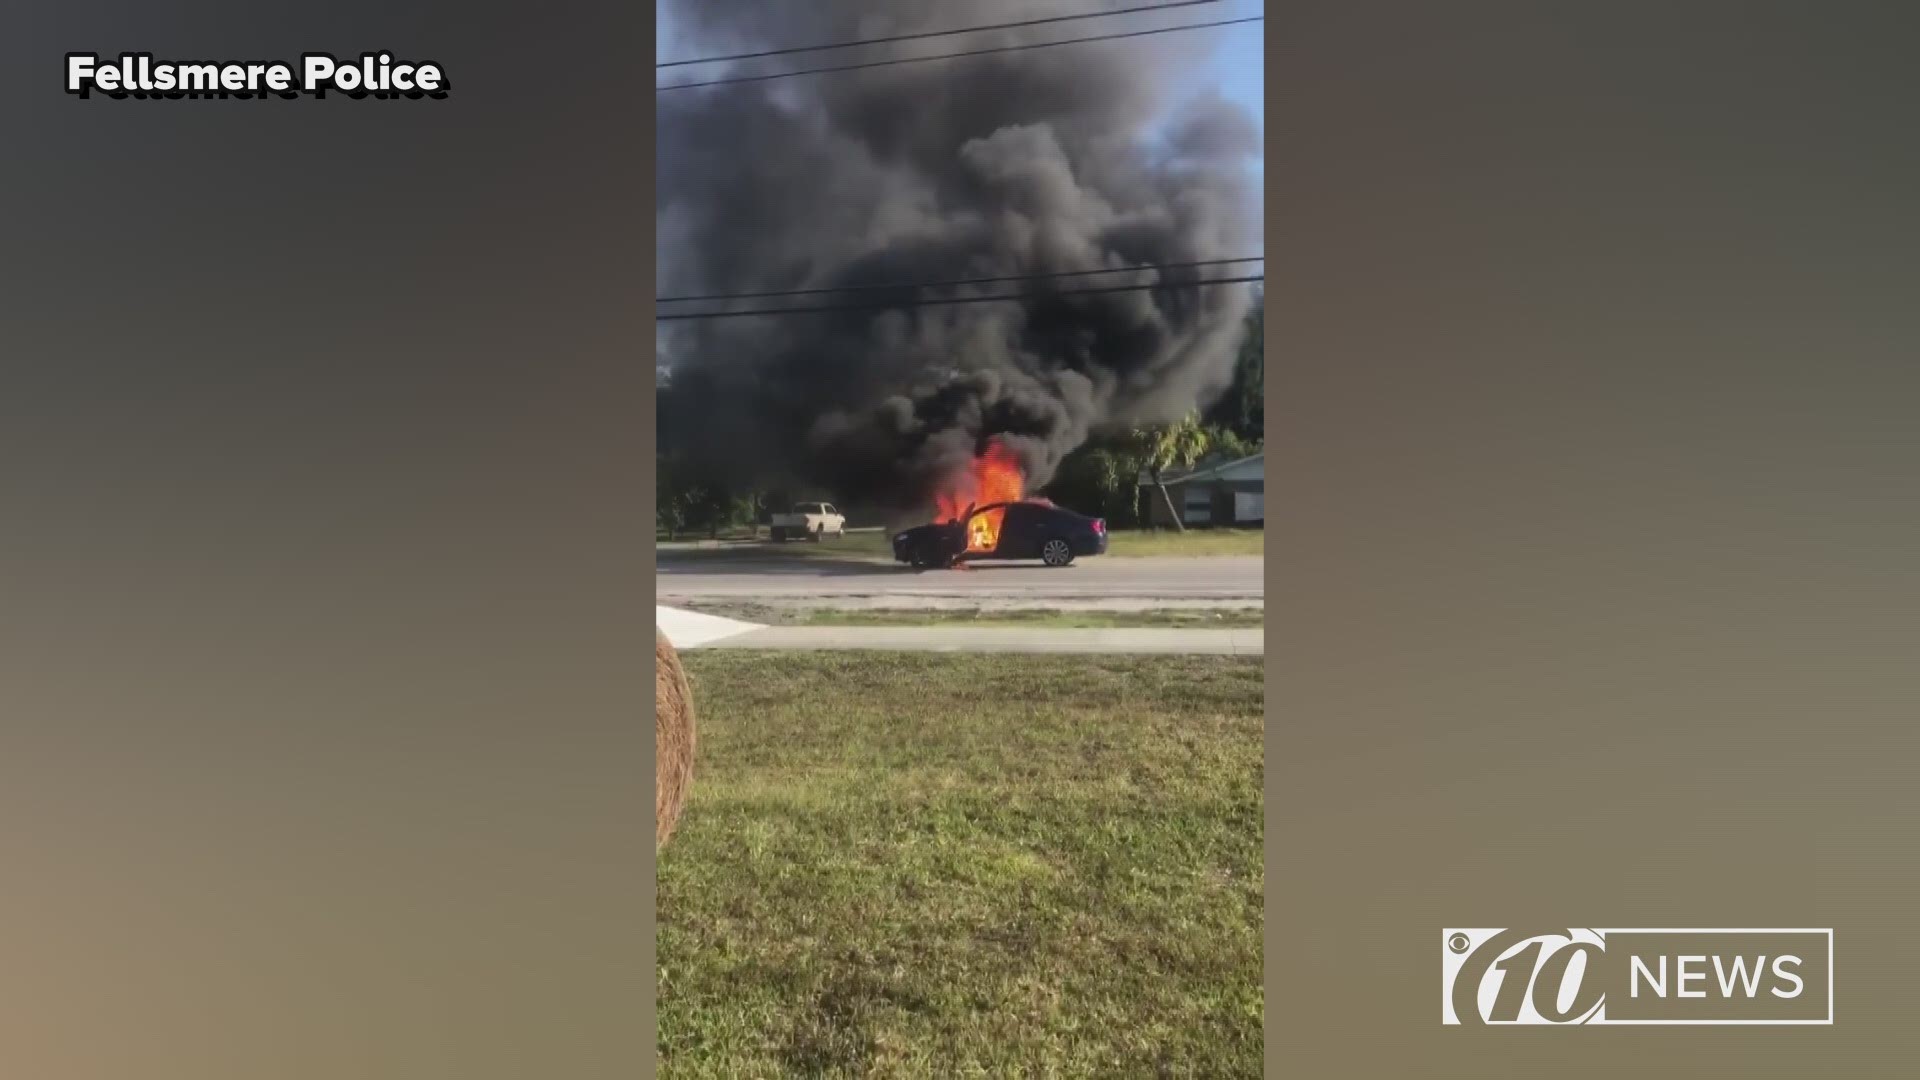 A car fire shut down an intersection Wednesday in Indian River County. (Video Credit: Fellsmere Police)